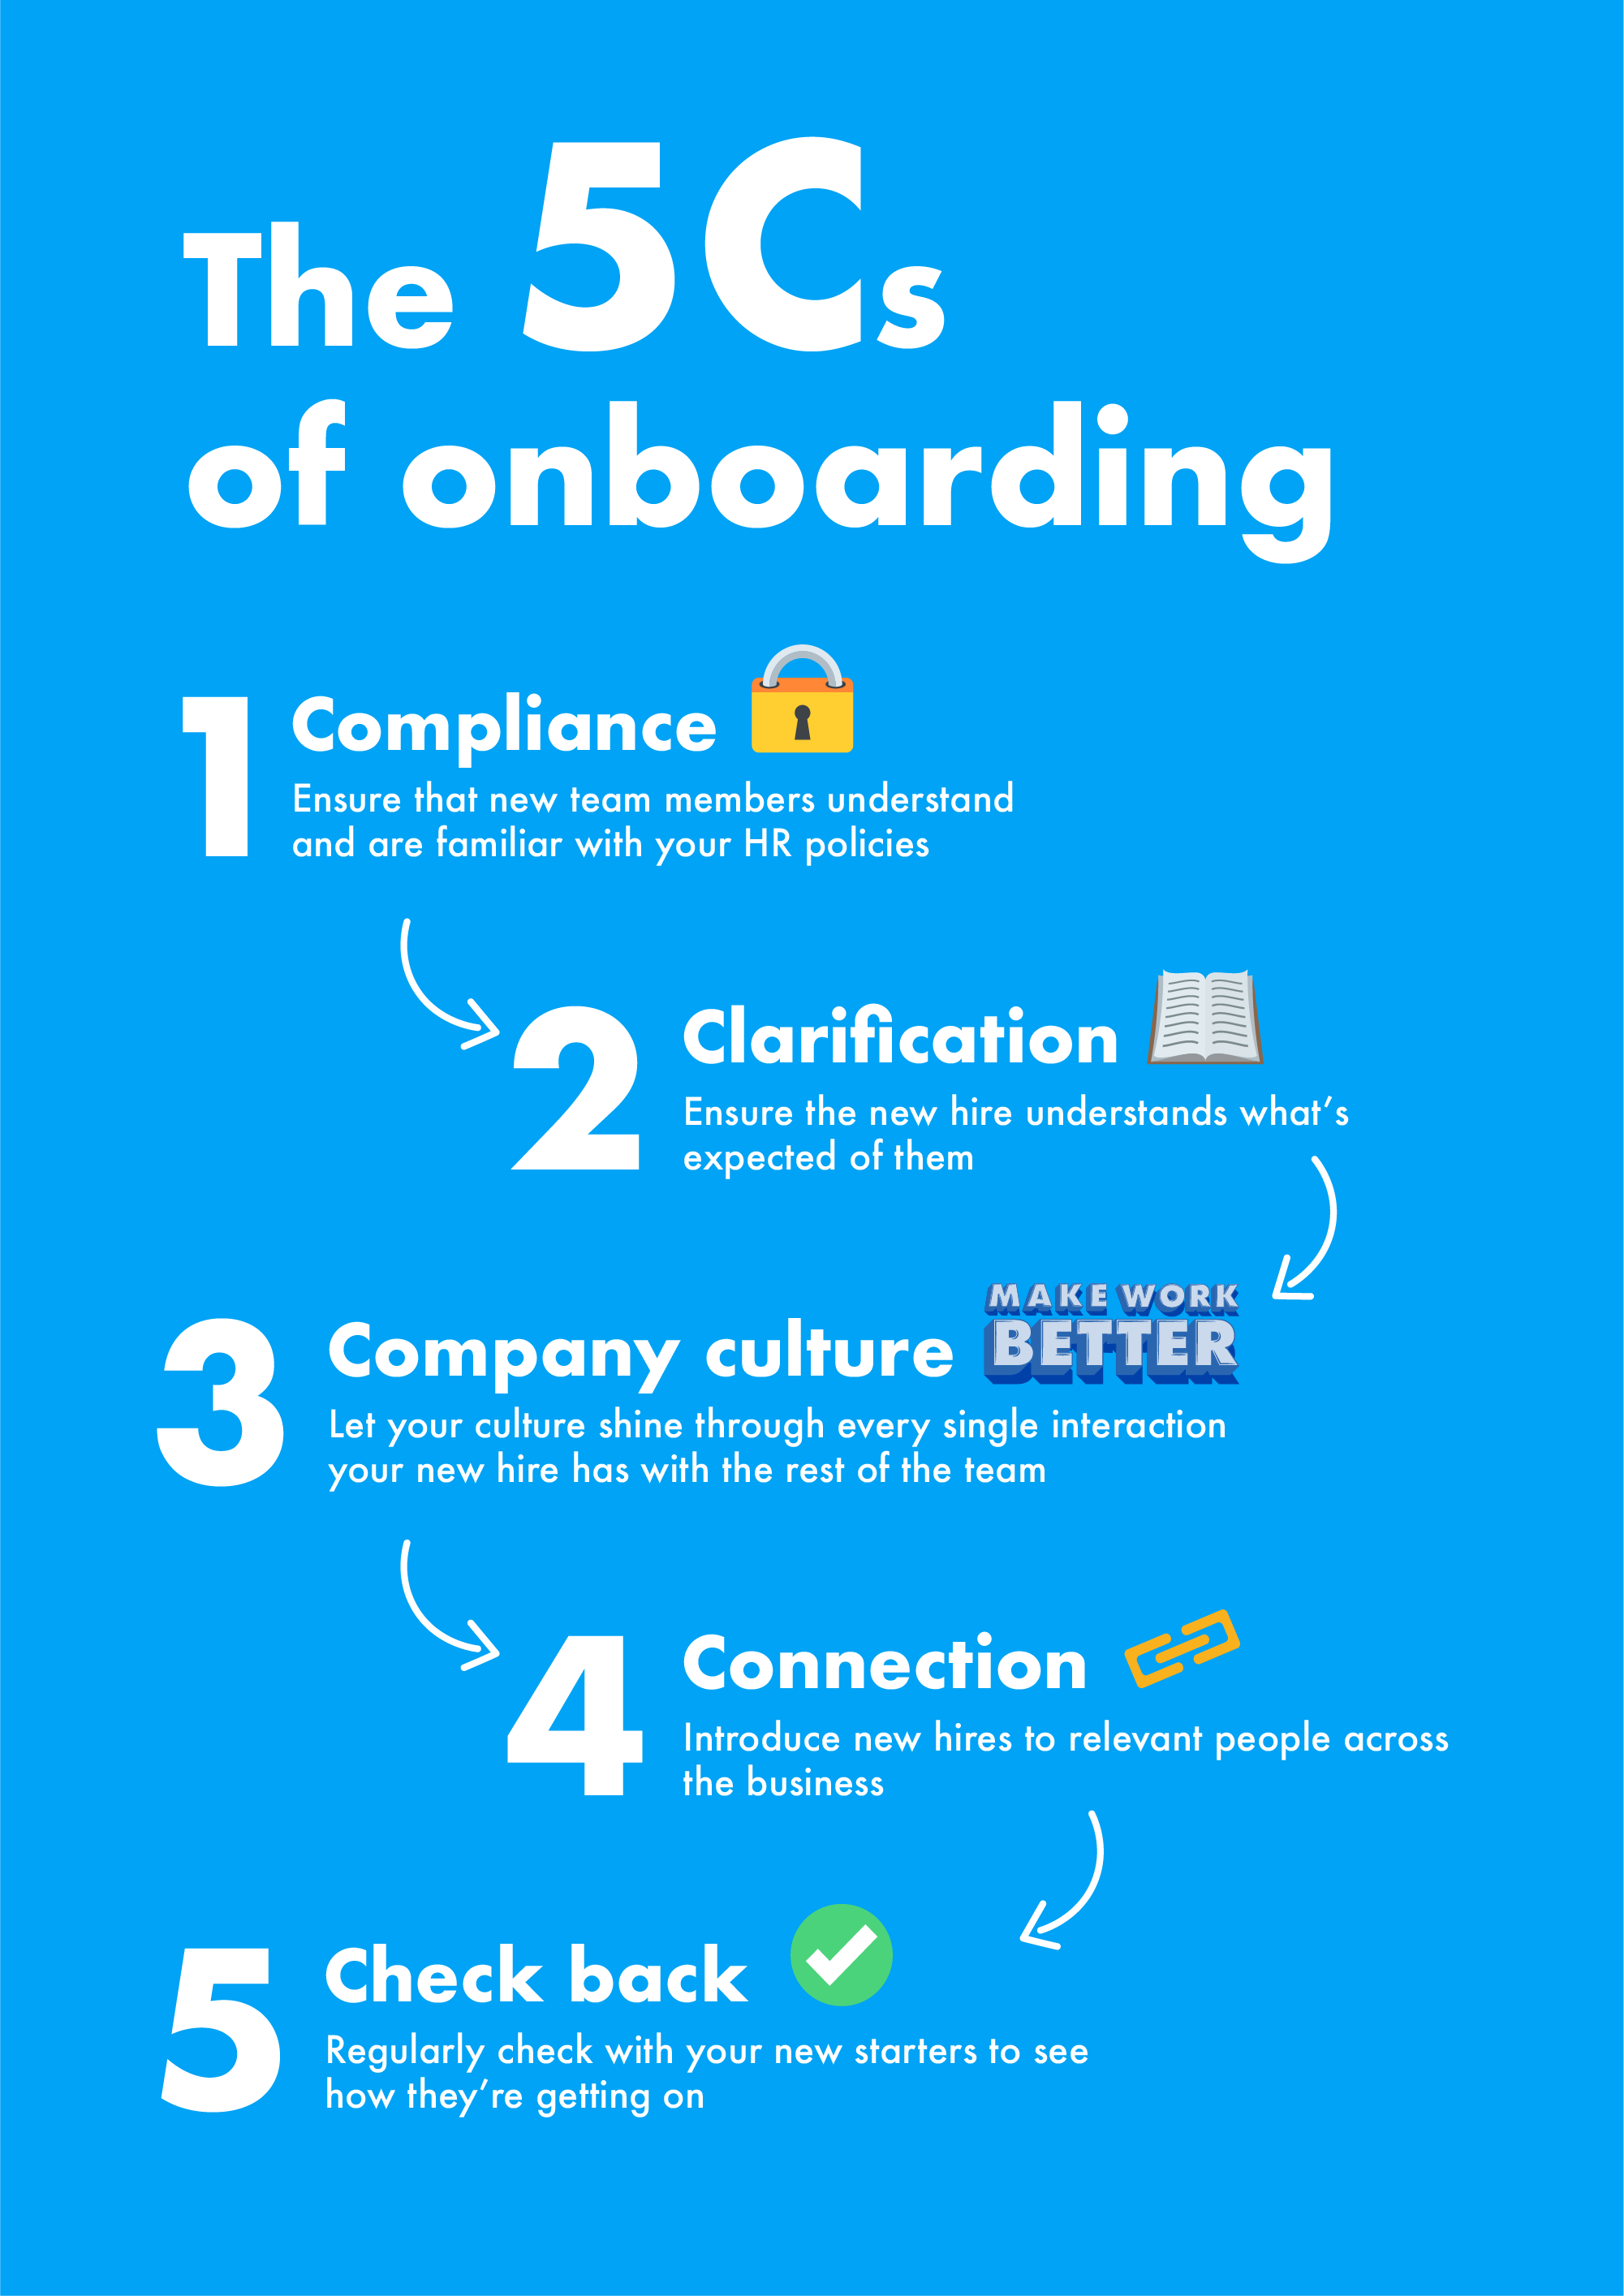 list of the 5cs of onboarding